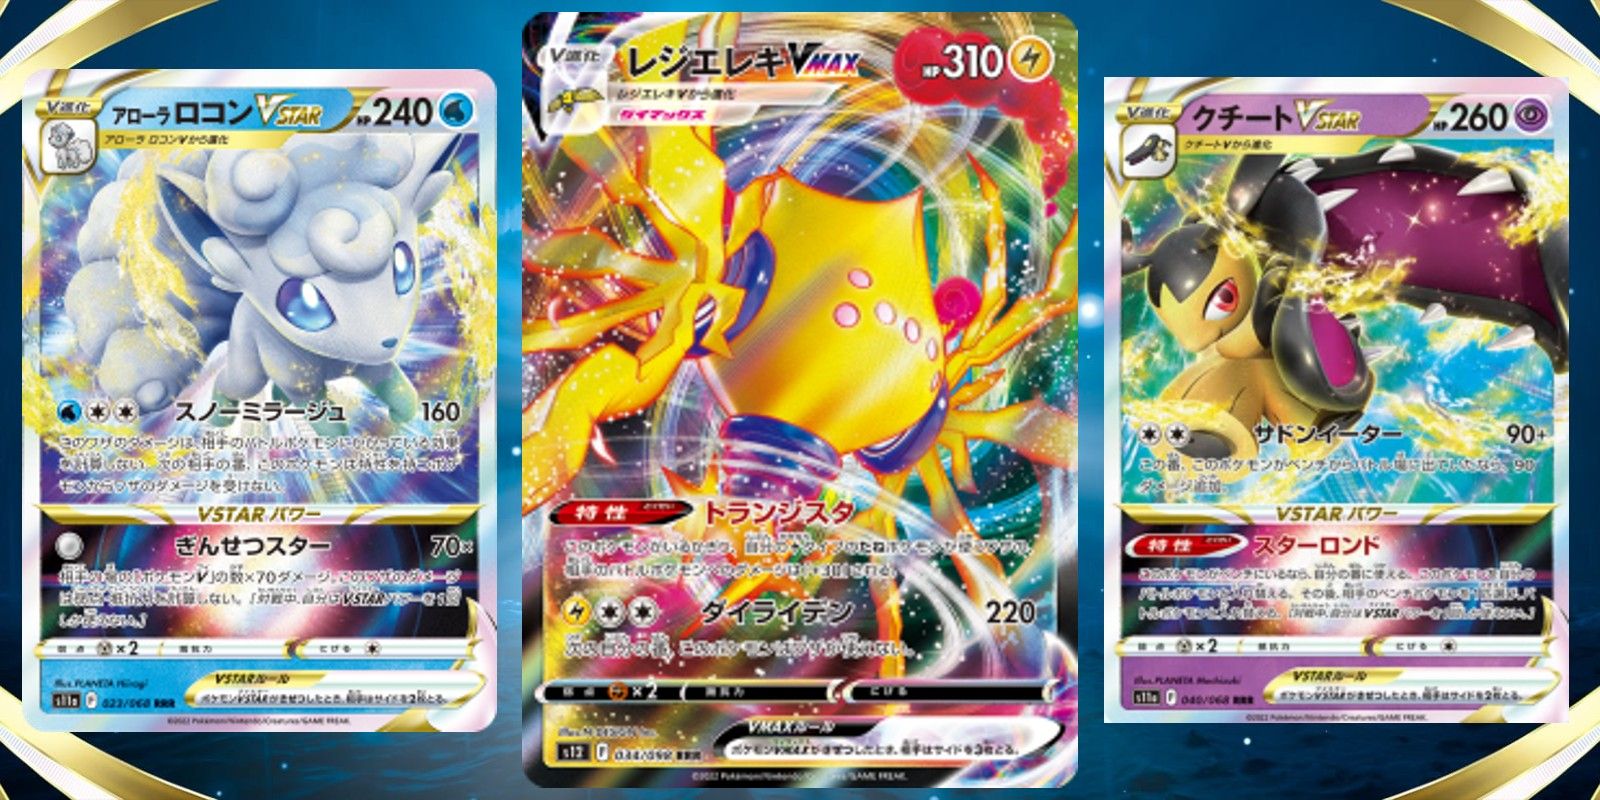 A collage of three different Pokémon cards featured in Silver Tempest on top of a blue background. From left to right: Alolan Vulpix VSTAR, Regieleki VMAX, and Mawile VSTAR.